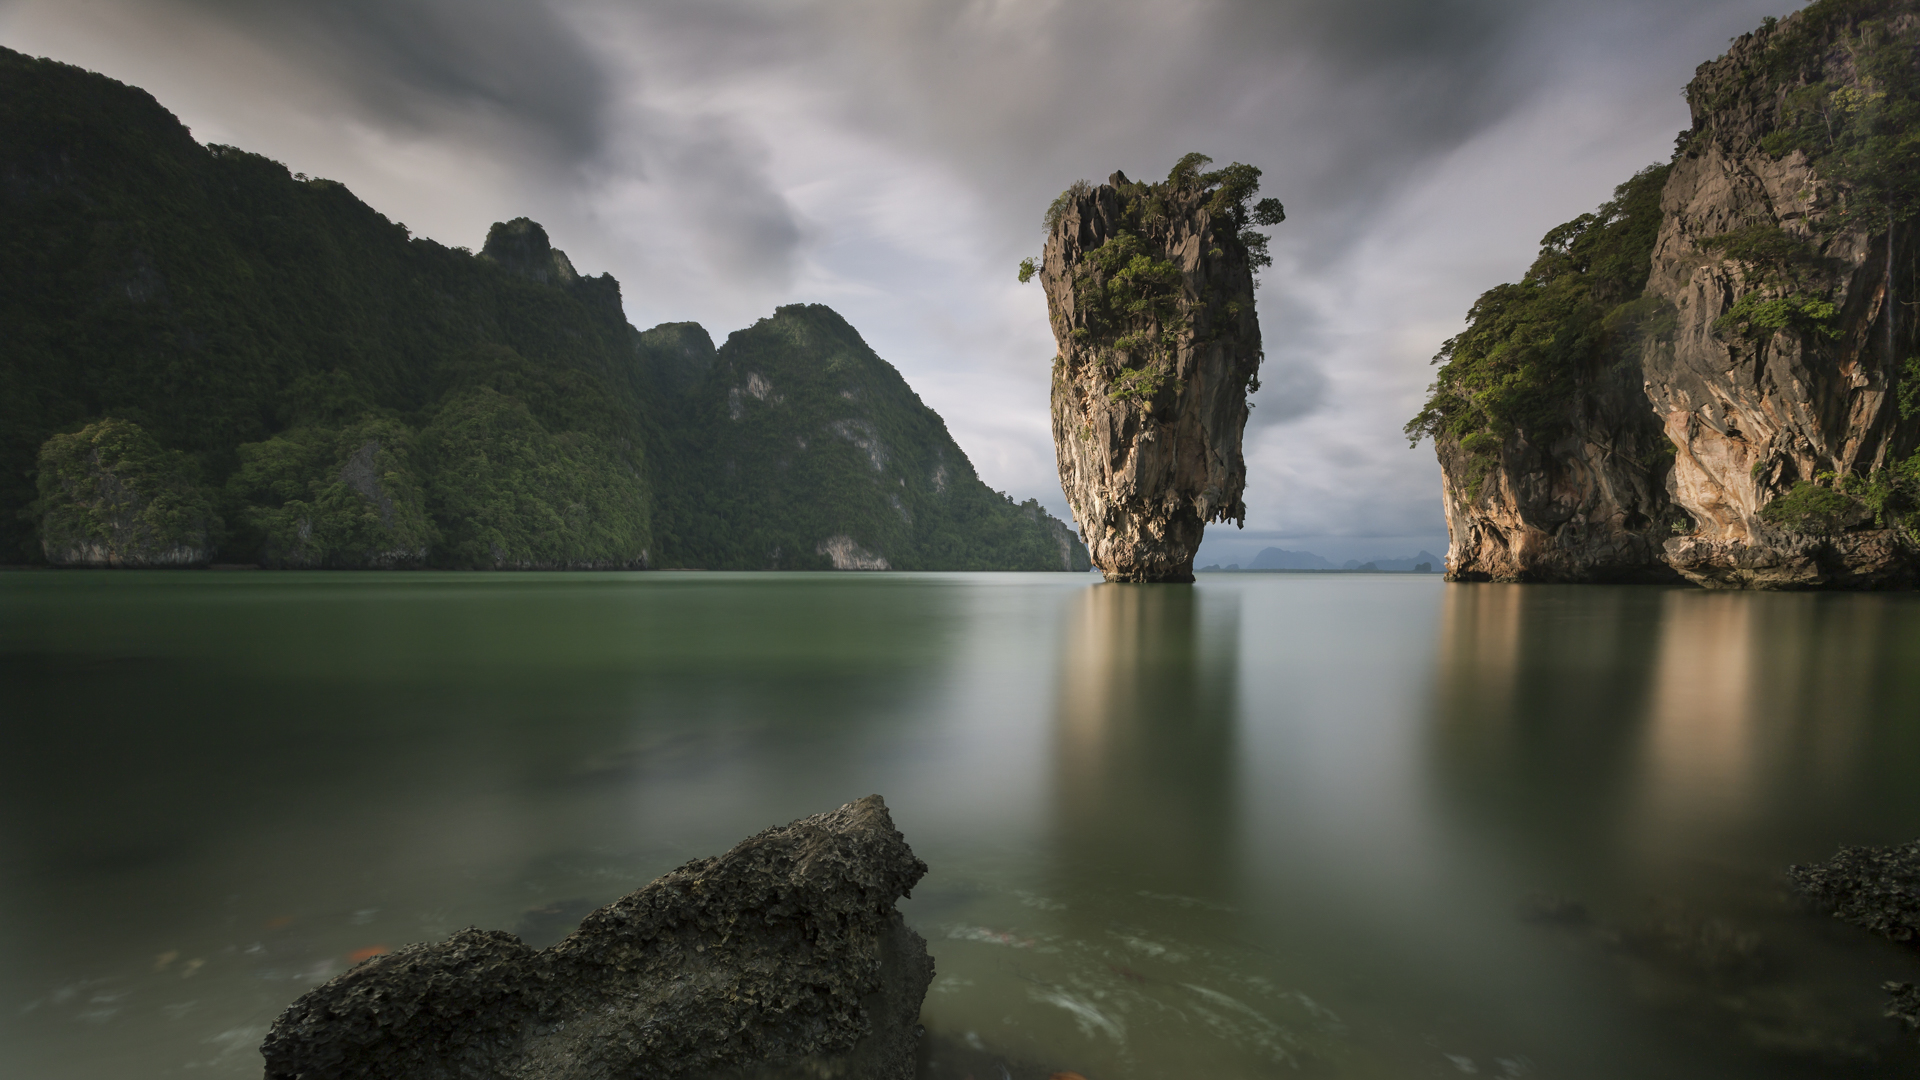 General 1920x1080 nature landscape water Phang Nga bay Thailand clouds trees mountains Phi Phi Islands